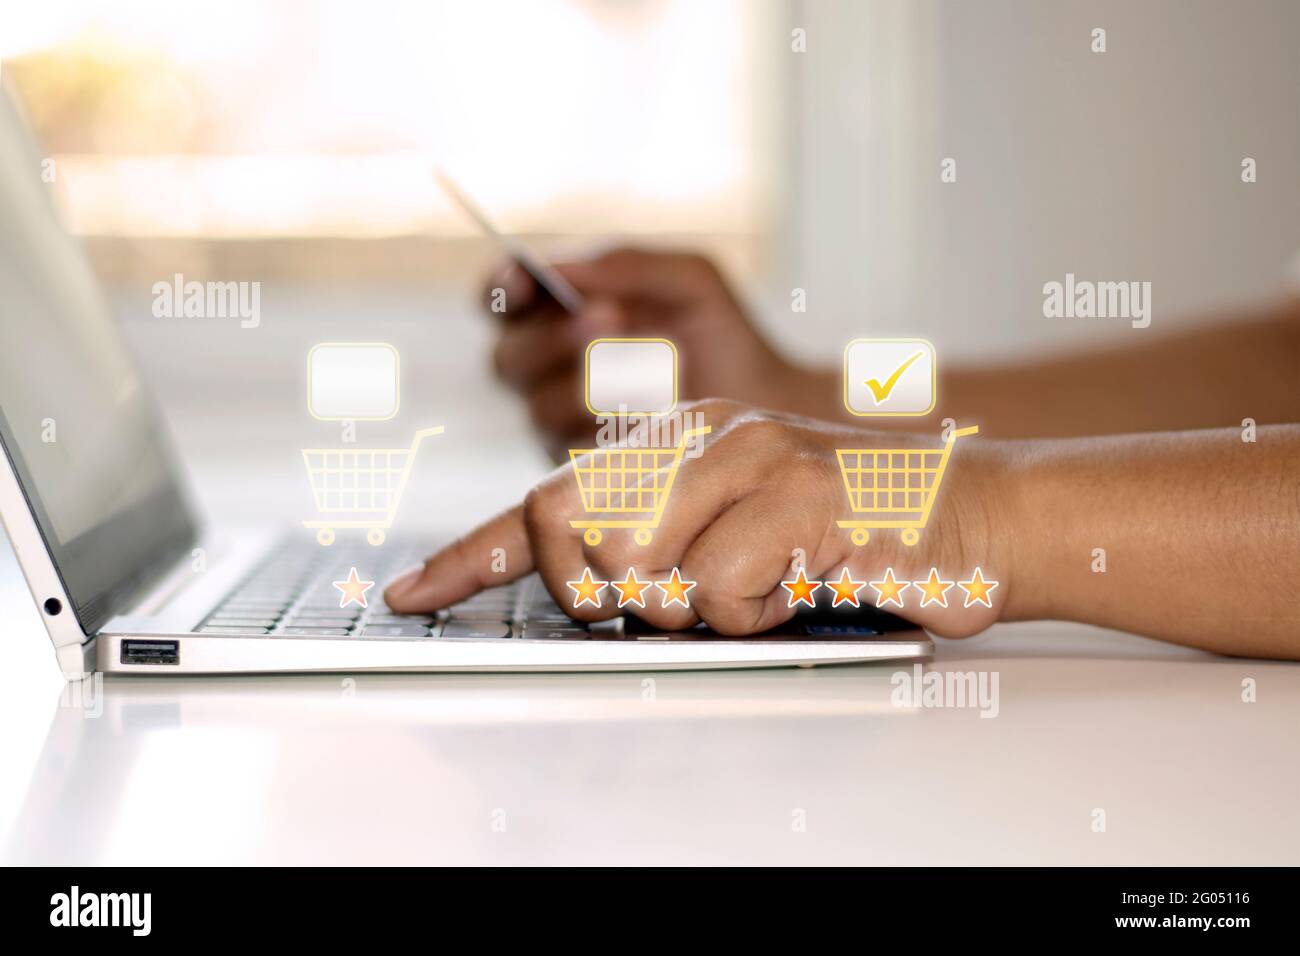 Business women press laptop keyboards to place orders online, appraise ideas, make decisions and online shopping. Stock Photo